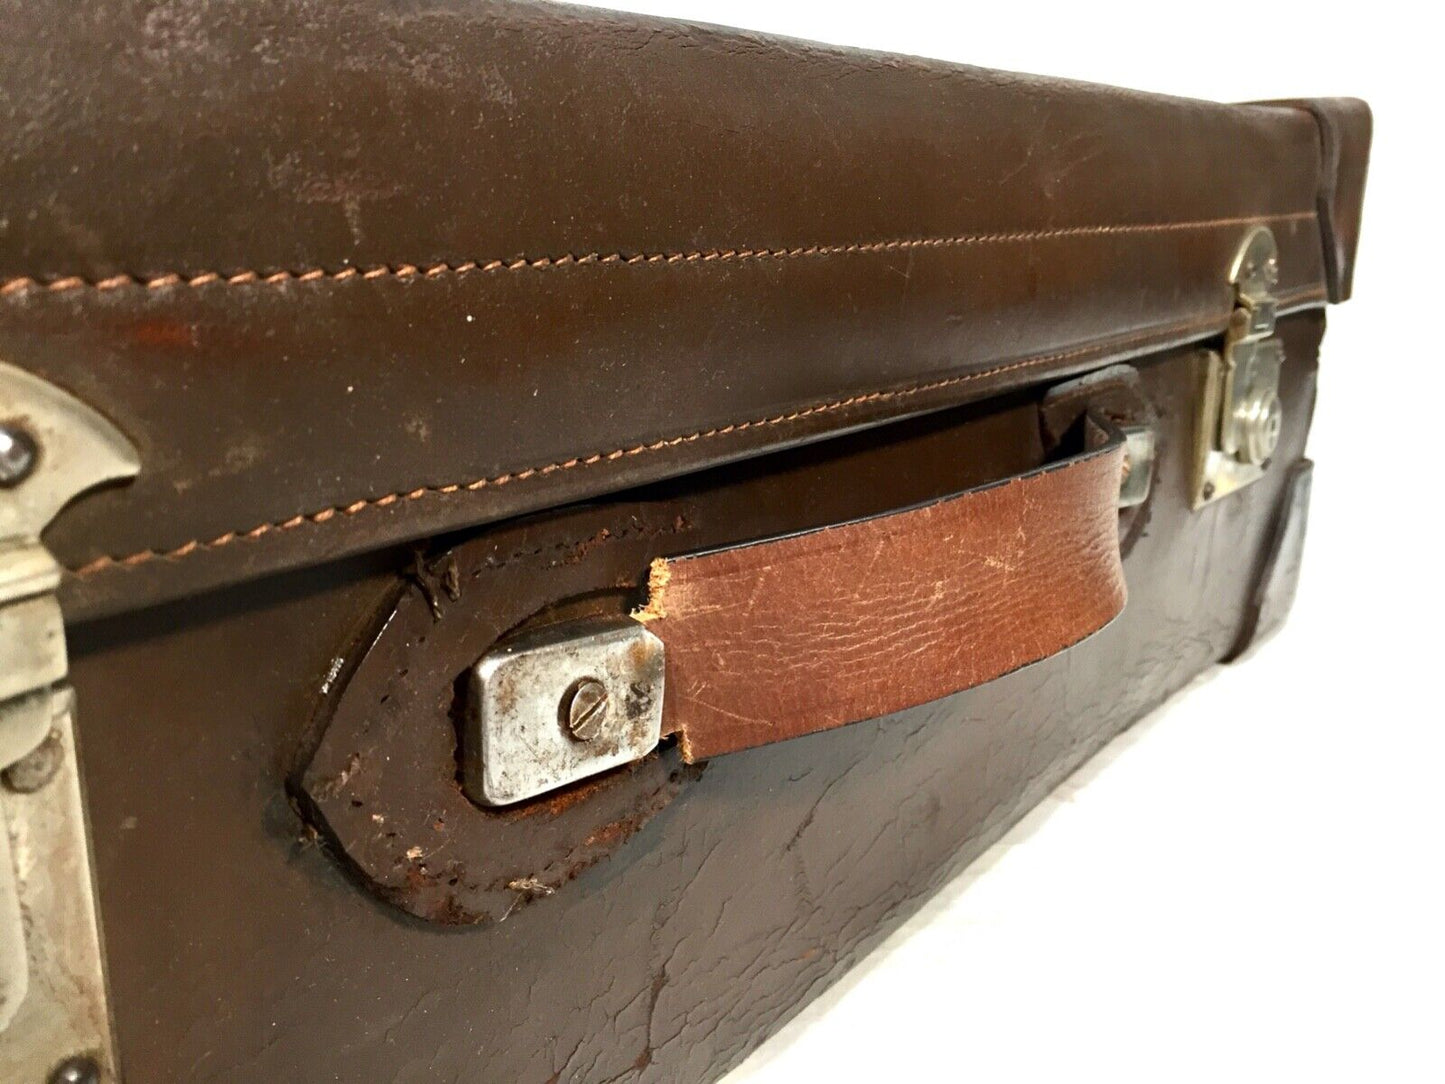 Antique Leather Gentleman's Travel Bag From WWII RAF Biggin Hill / c.1940